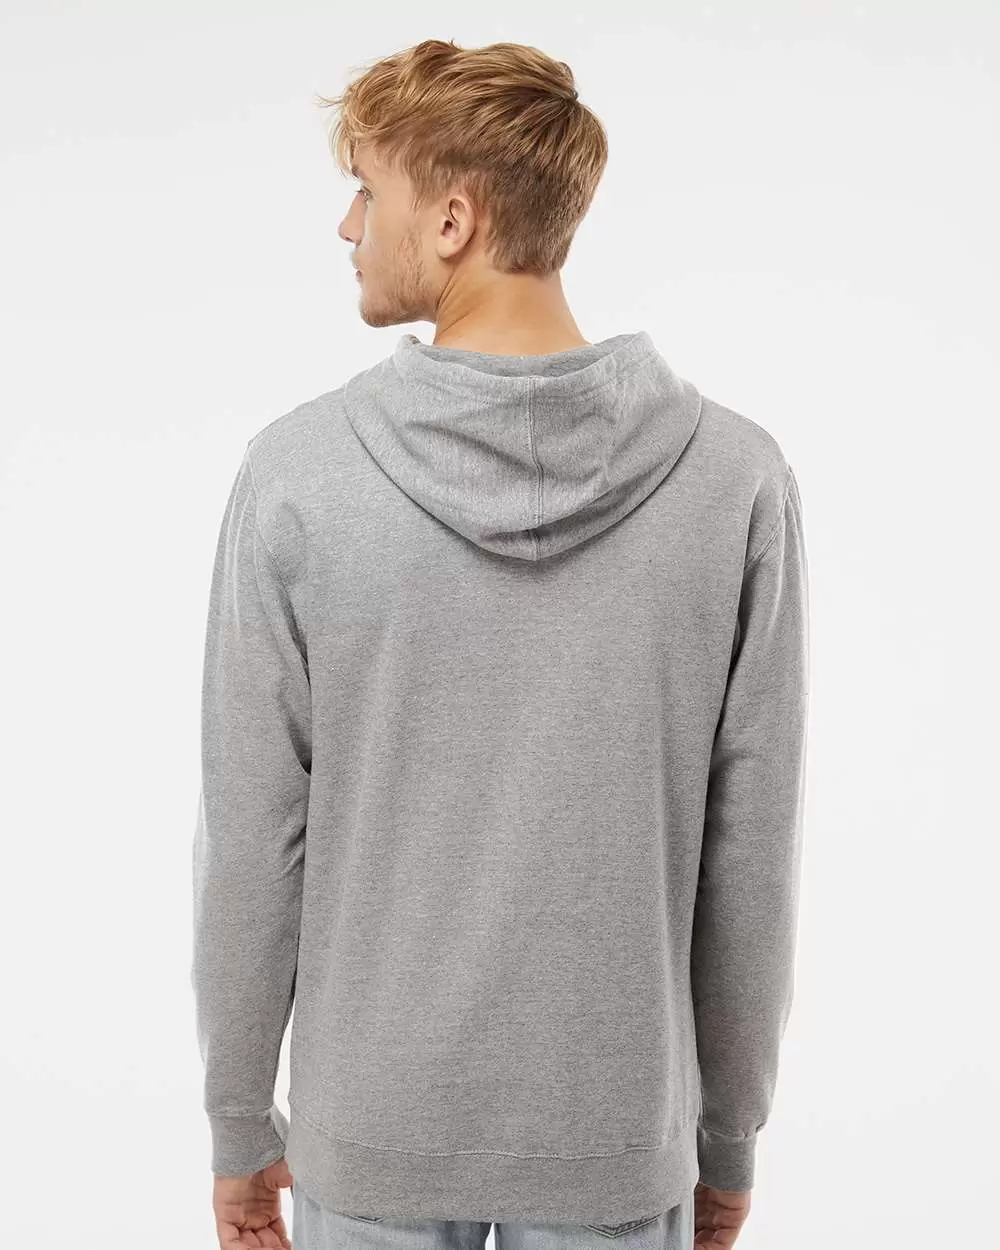 Independent Trading Co. SS4500 Midweight Hoodie - From $12.31